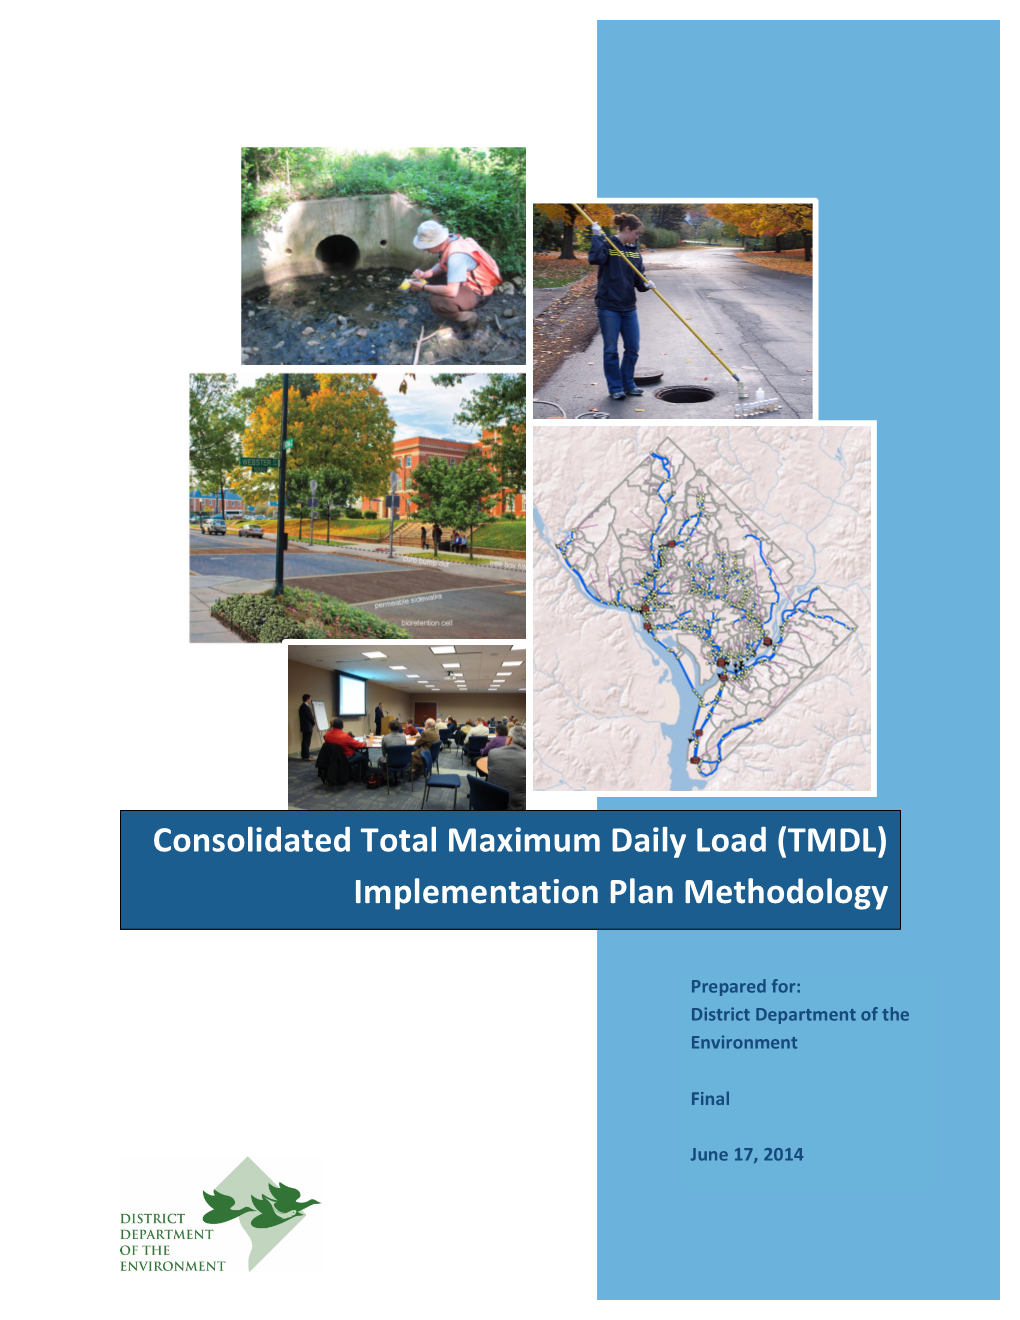 Consolidated Total Maximum Daily Load (TMDL) Implementation Plan Methodology